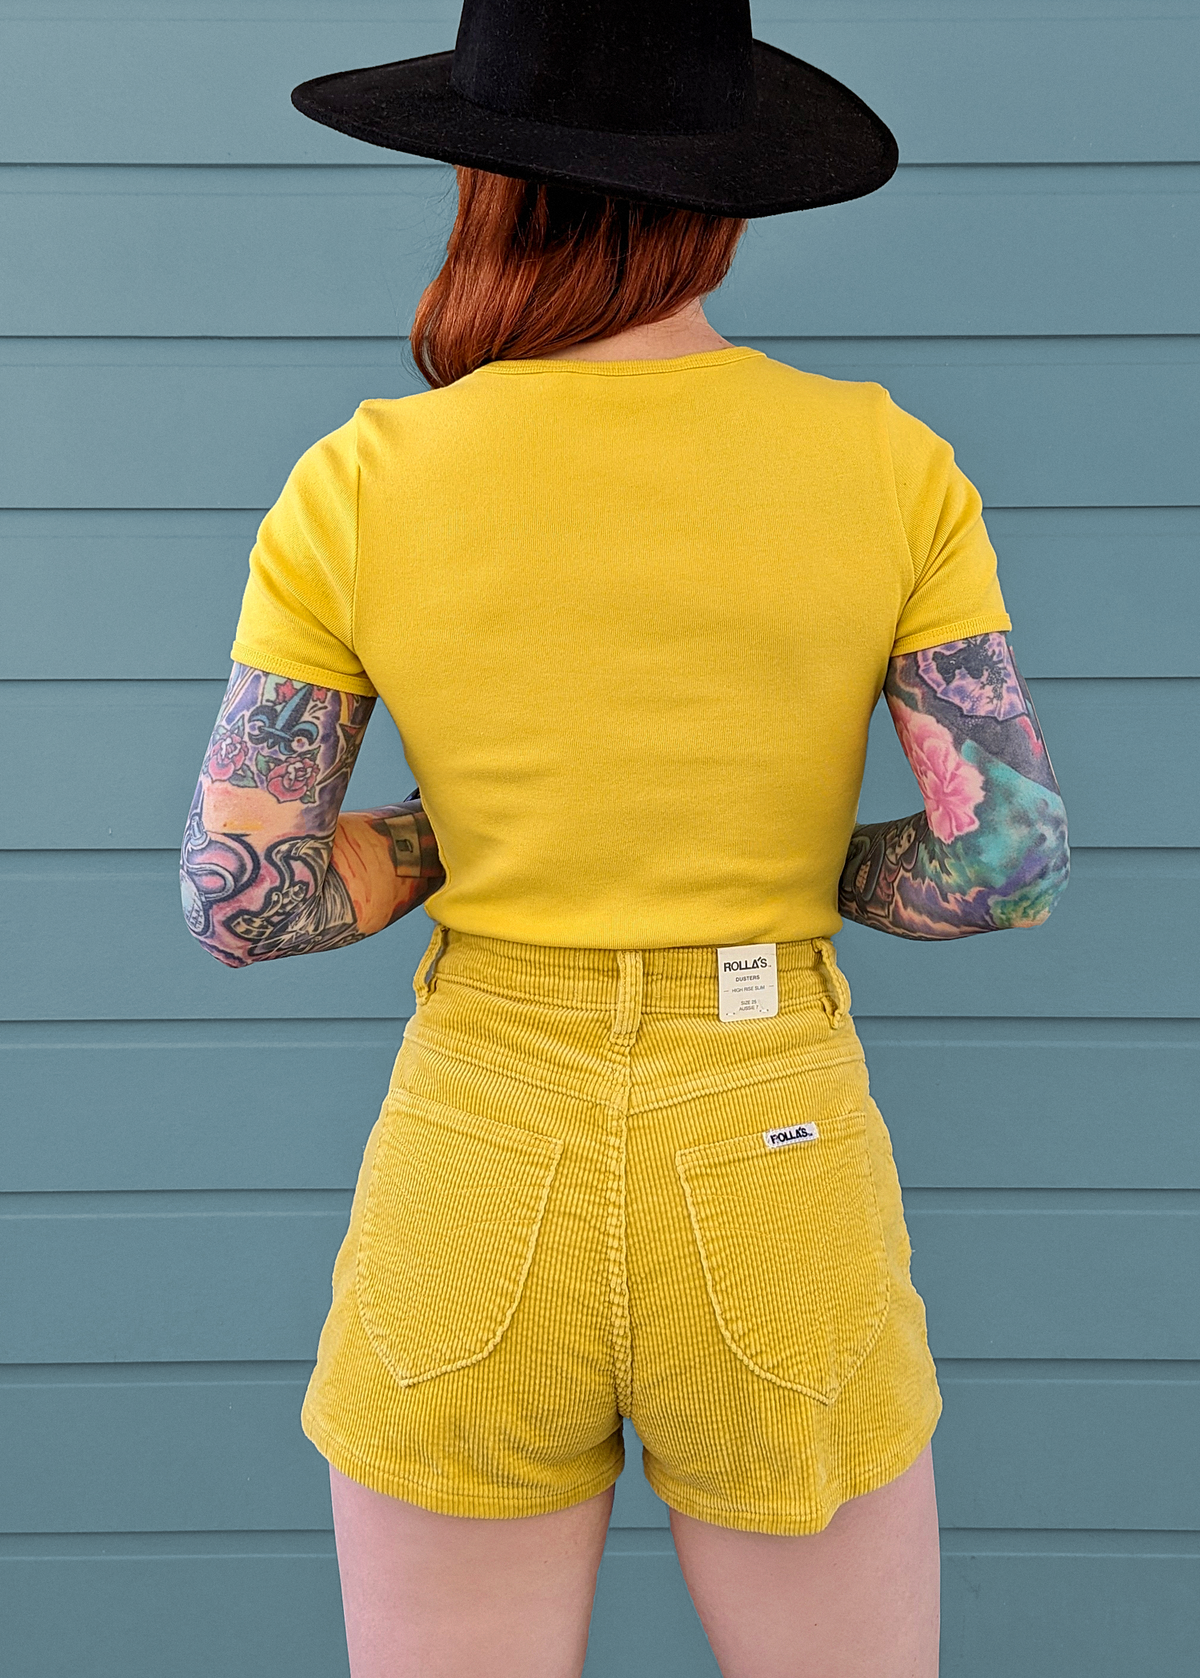 Gold Yellow Stretch Corduroy Dusters Shorts with high rise waist by Rolla's Jeans